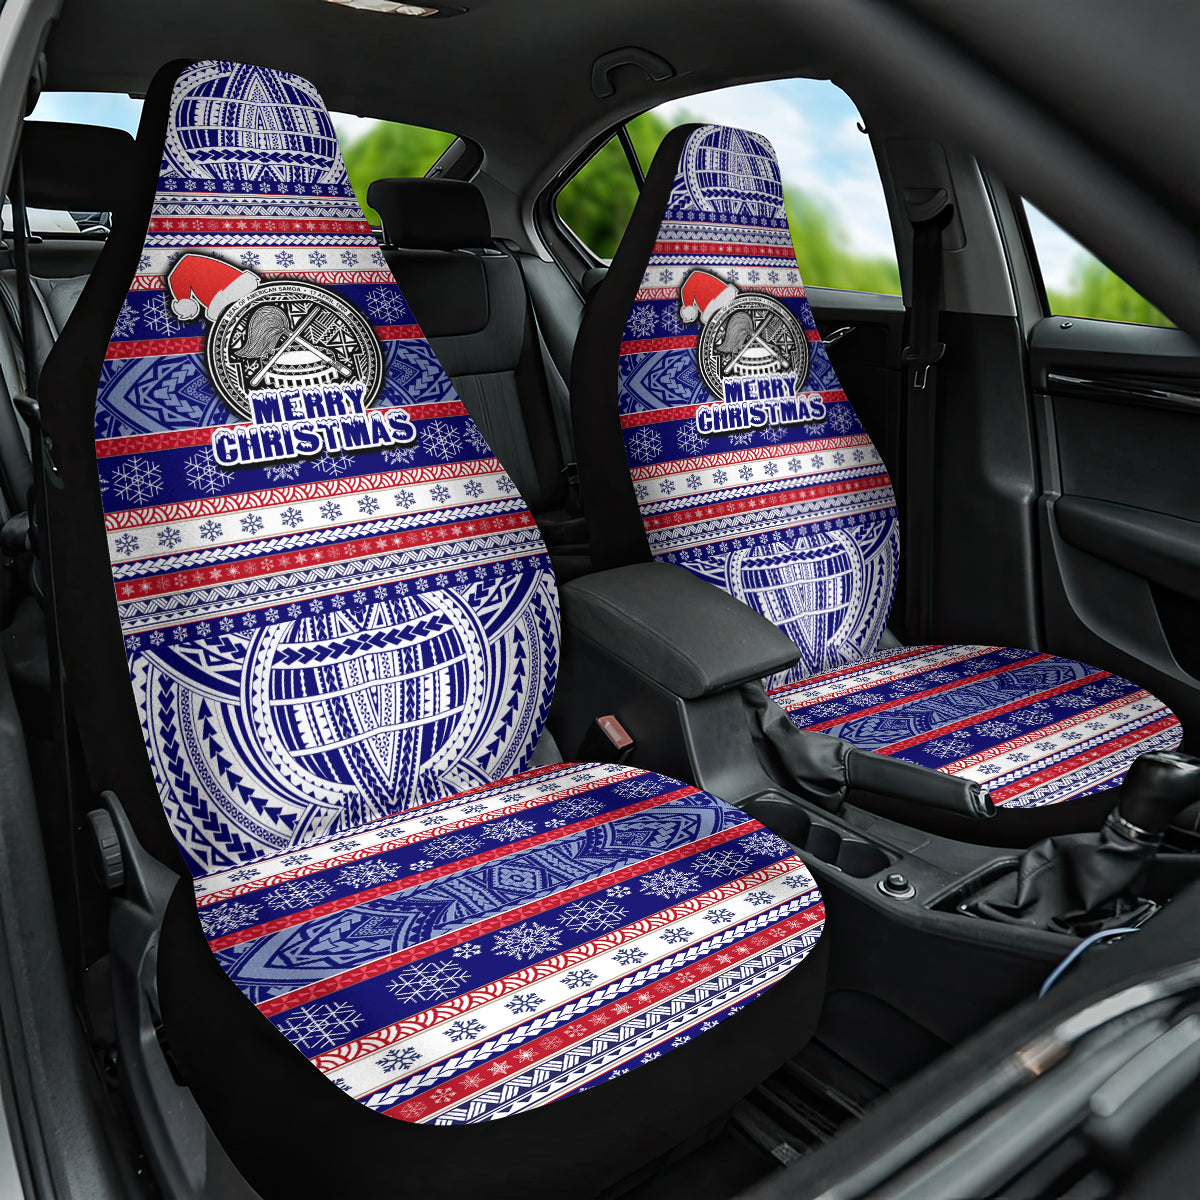 American Samoa Christmas Car Seat Cover Samoan Coat of Arms and Cool Santa Ornament Style LT03 One Size Blue - Polynesian Pride